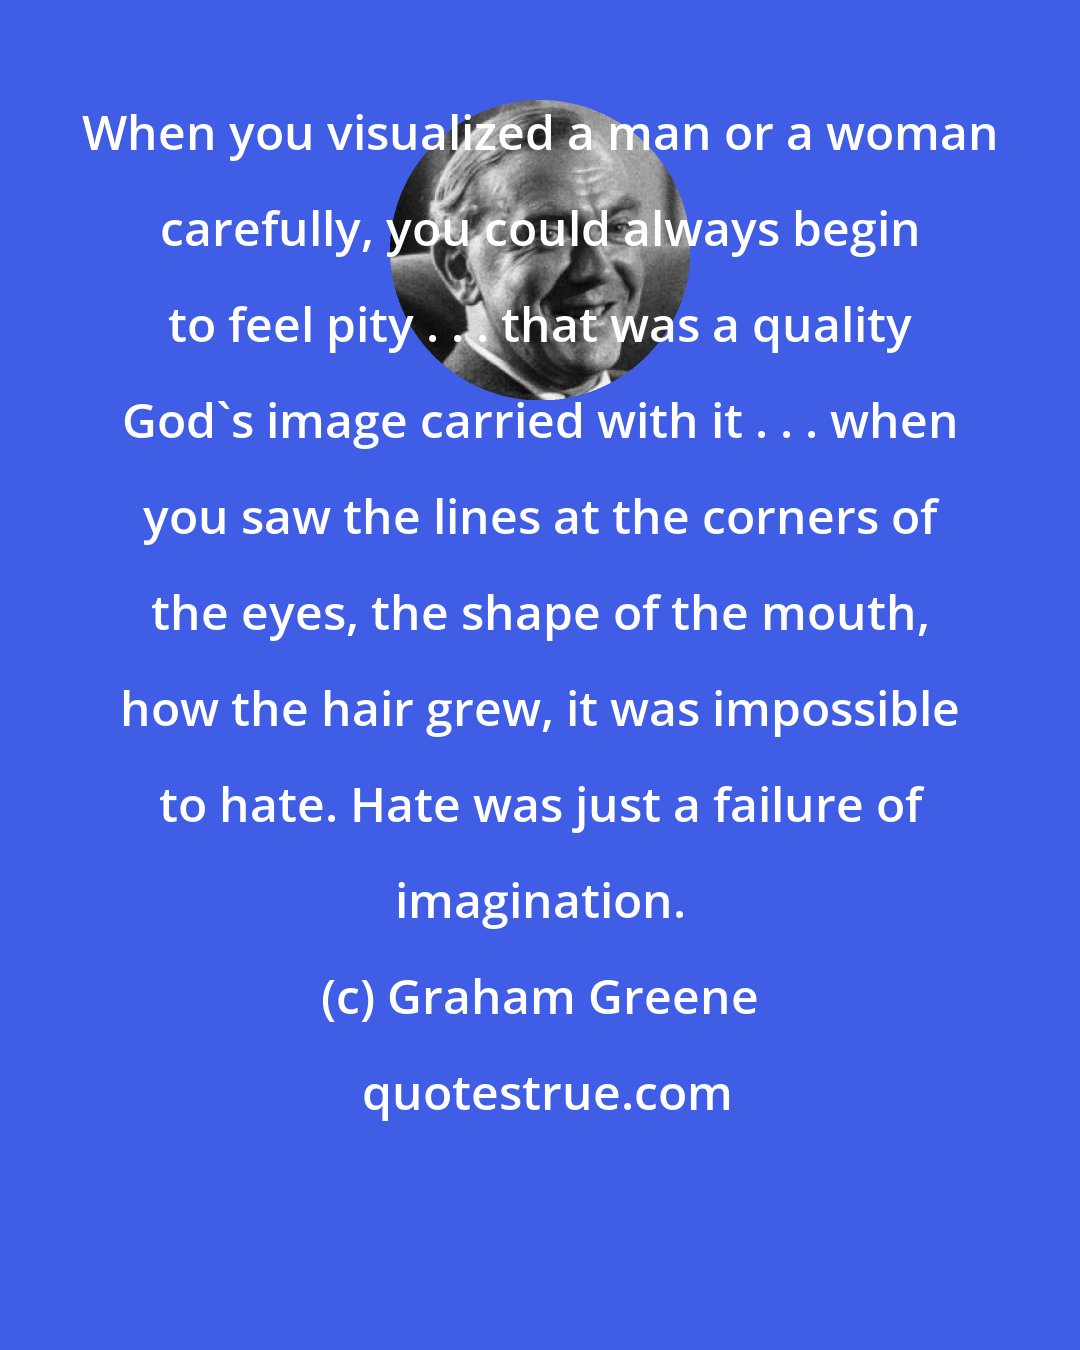 Graham Greene: When you visualized a man or a woman carefully, you could always begin to feel pity . . . that was a quality God's image carried with it . . . when you saw the lines at the corners of the eyes, the shape of the mouth, how the hair grew, it was impossible to hate. Hate was just a failure of imagination.